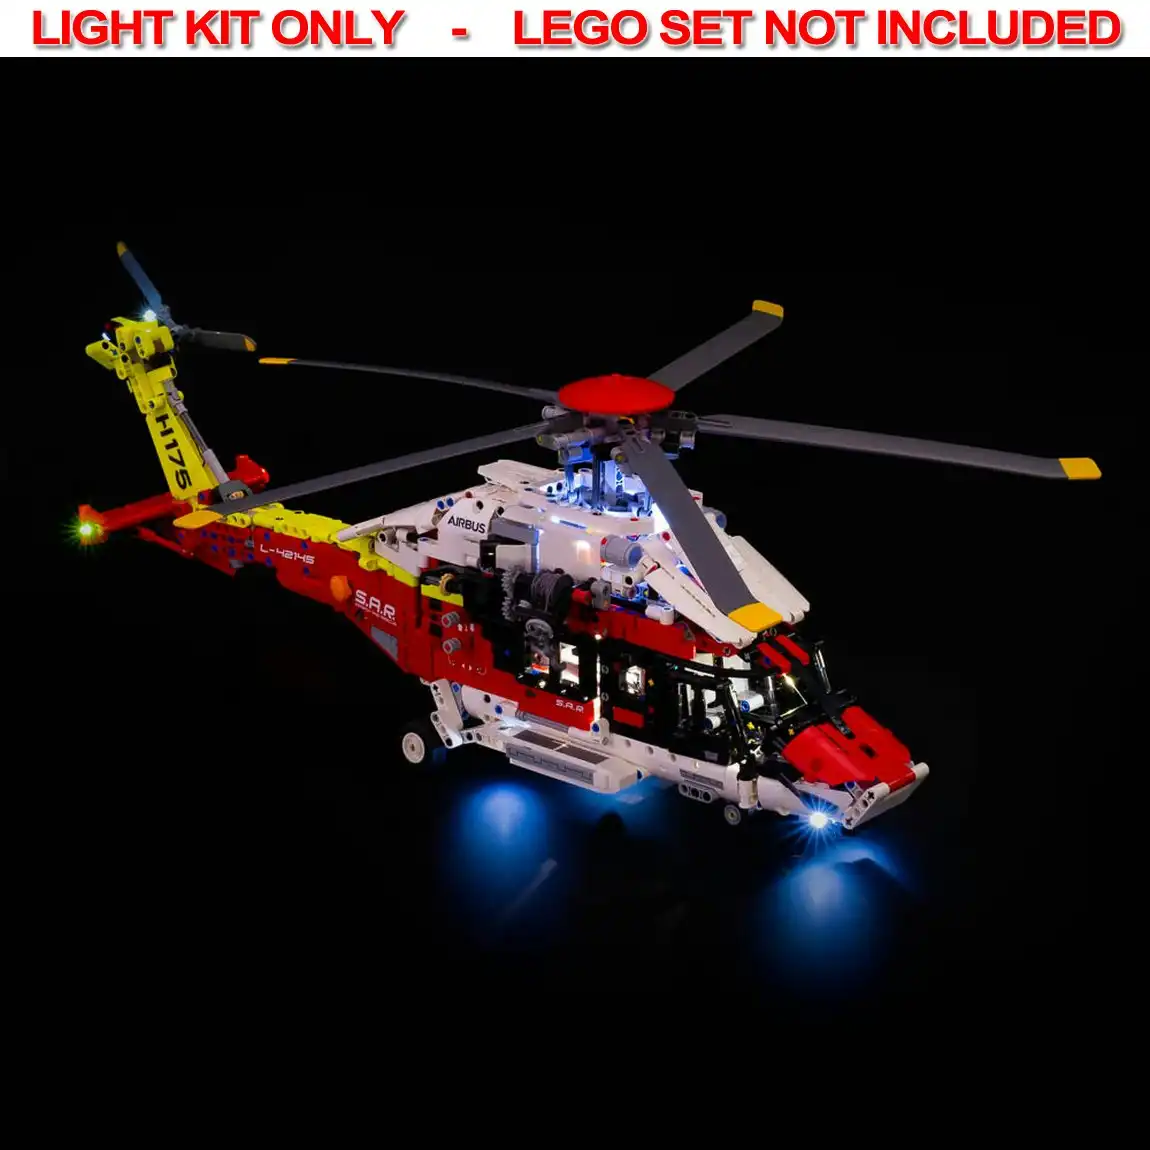 Light My Bricks - LIGHT KIT for LEGO Airbus H175 Rescue Helicopter 42145